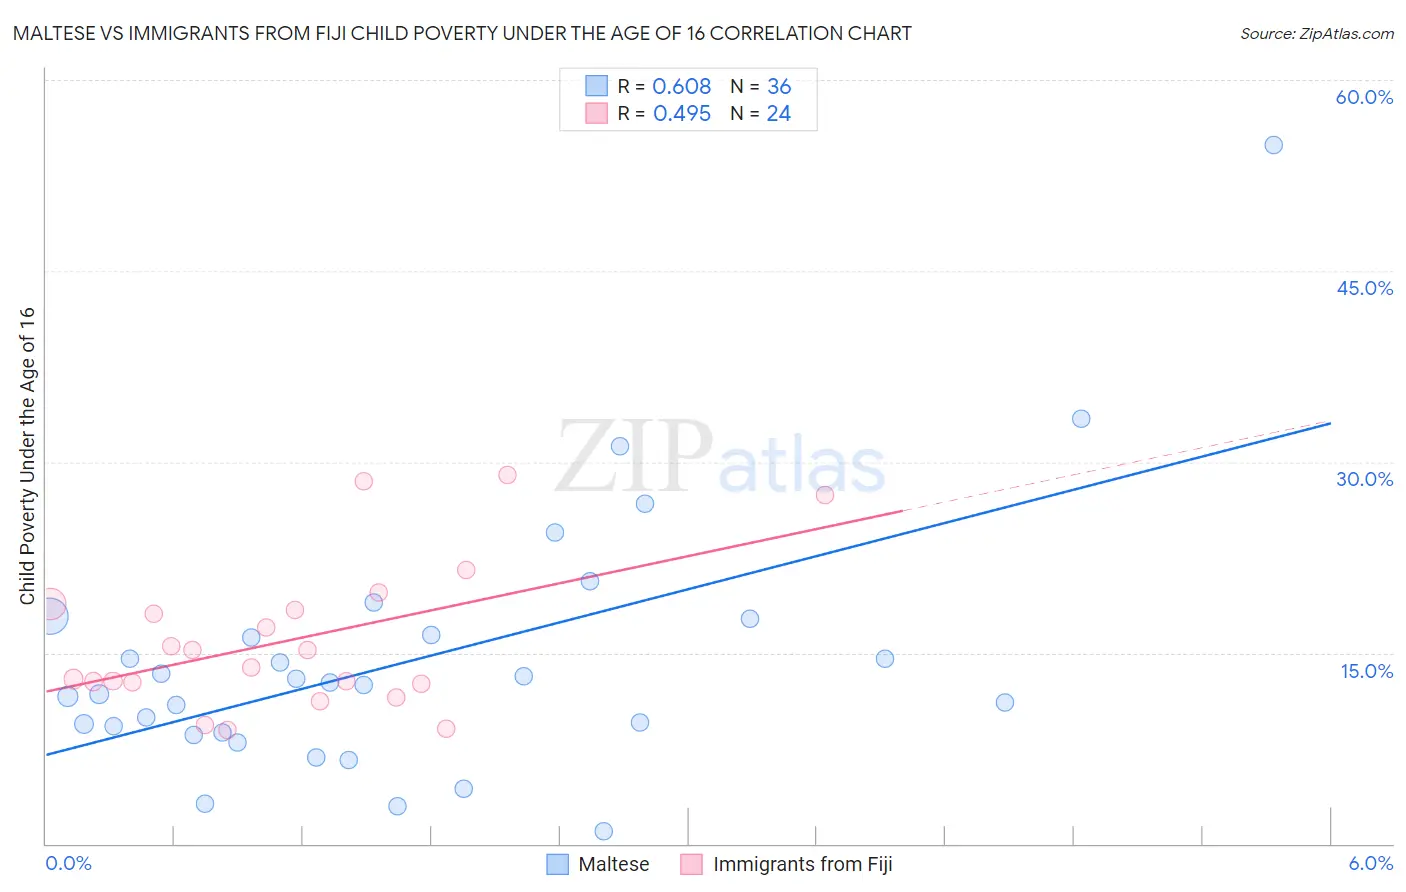 Maltese vs Immigrants from Fiji Child Poverty Under the Age of 16